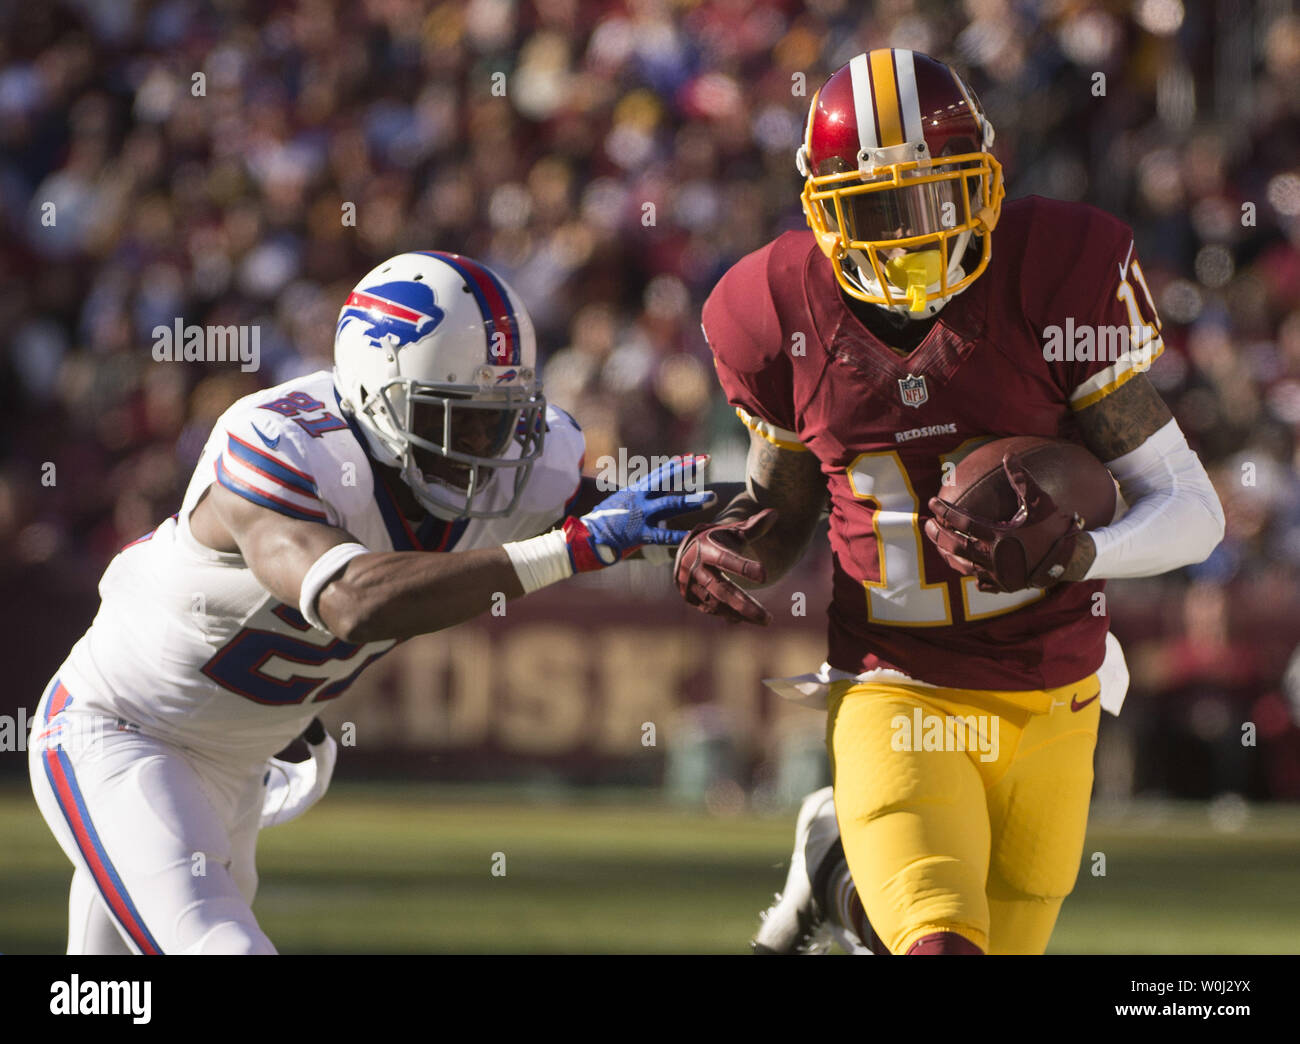 Washington Redskins wide receiver DeSean Jackson (11) brings in a 7-yard gain against Buffalo Bills strong safety Leodis McKelvin (21) in the first quarter at FedEx Field in Landover, Maryland on December 20, 2015. Photo by Kevin Dietsch/UPI Stock Photo